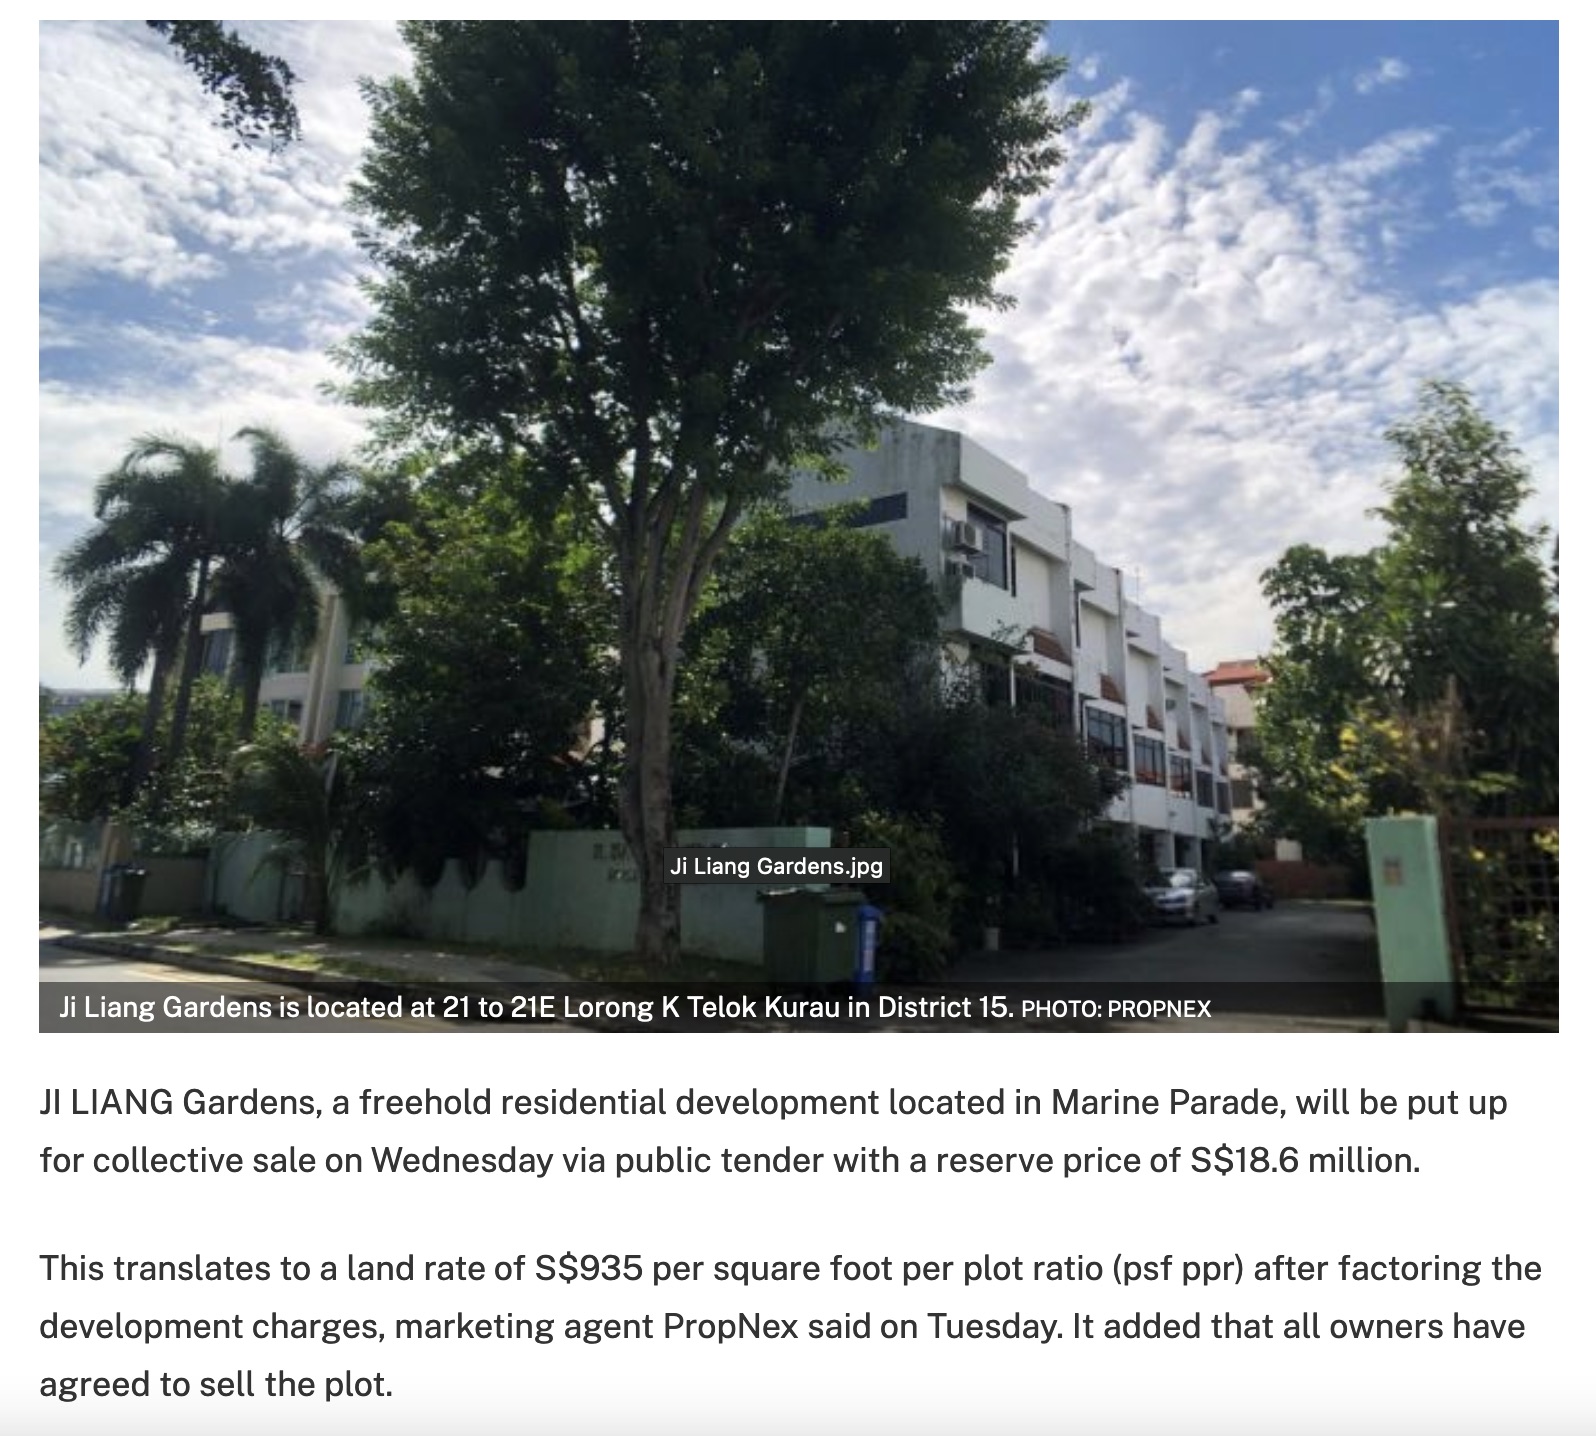 Ji-Liang-Gardens-in-Marine-Parade-up-for-collective-sale-with-S$18.6m-reserve-price-2